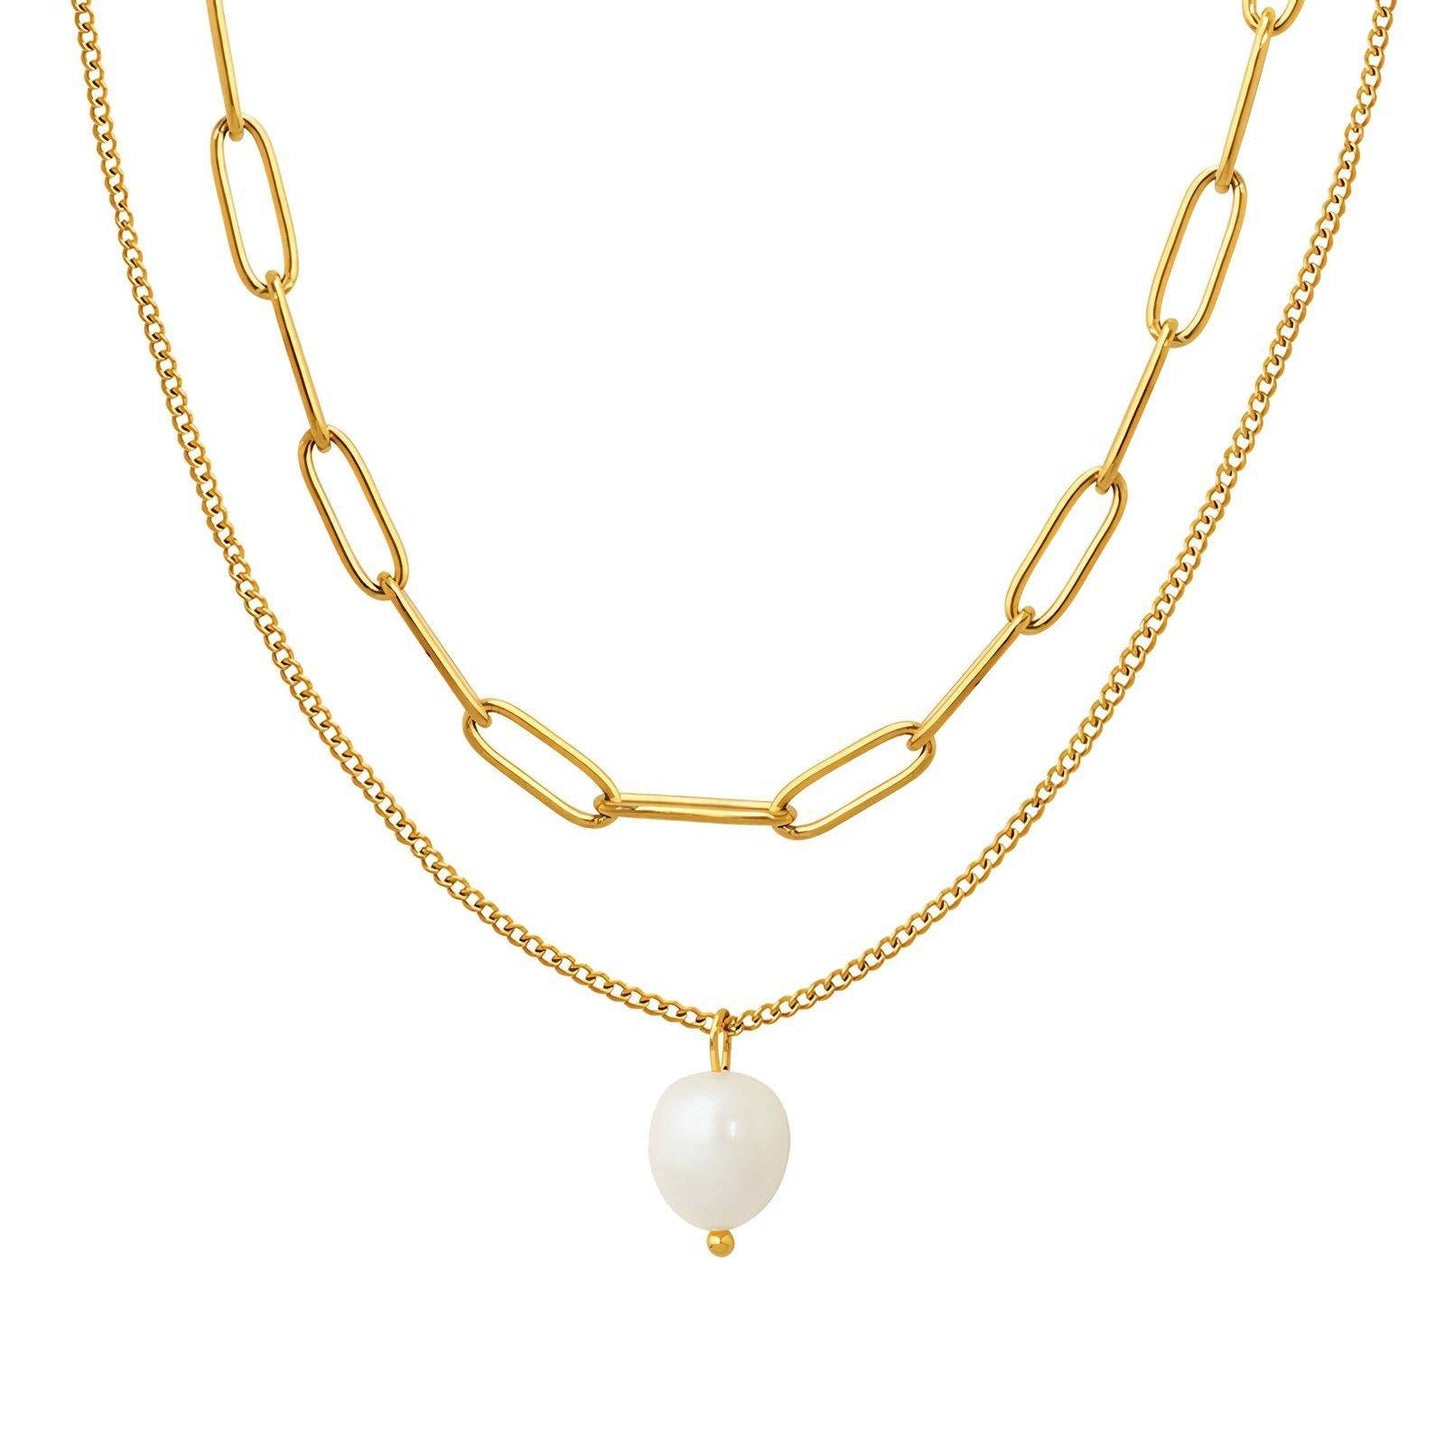 Double the gold with a pearl - Gold Plated Tarnish Free Jewellery